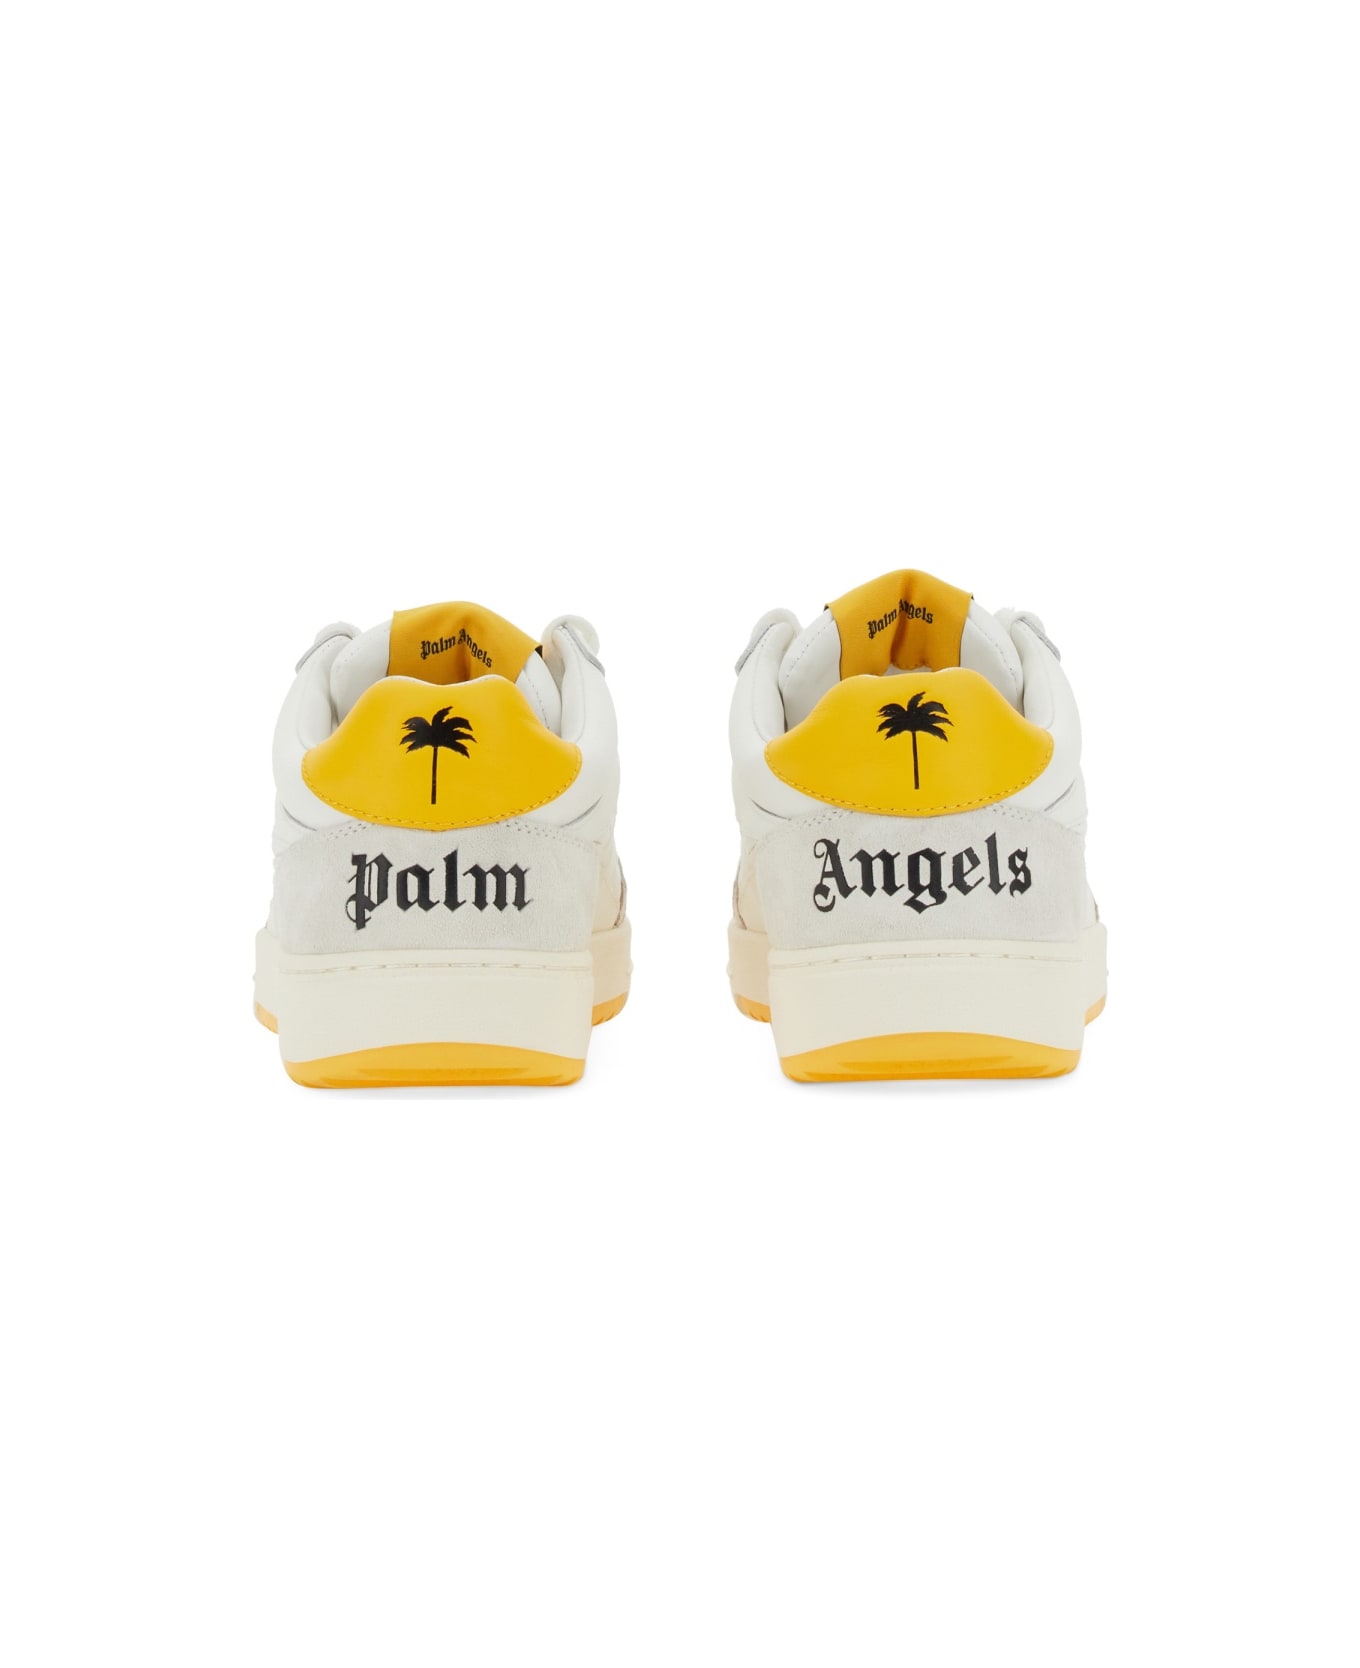 Palm Angels University Sneakers - WHITE